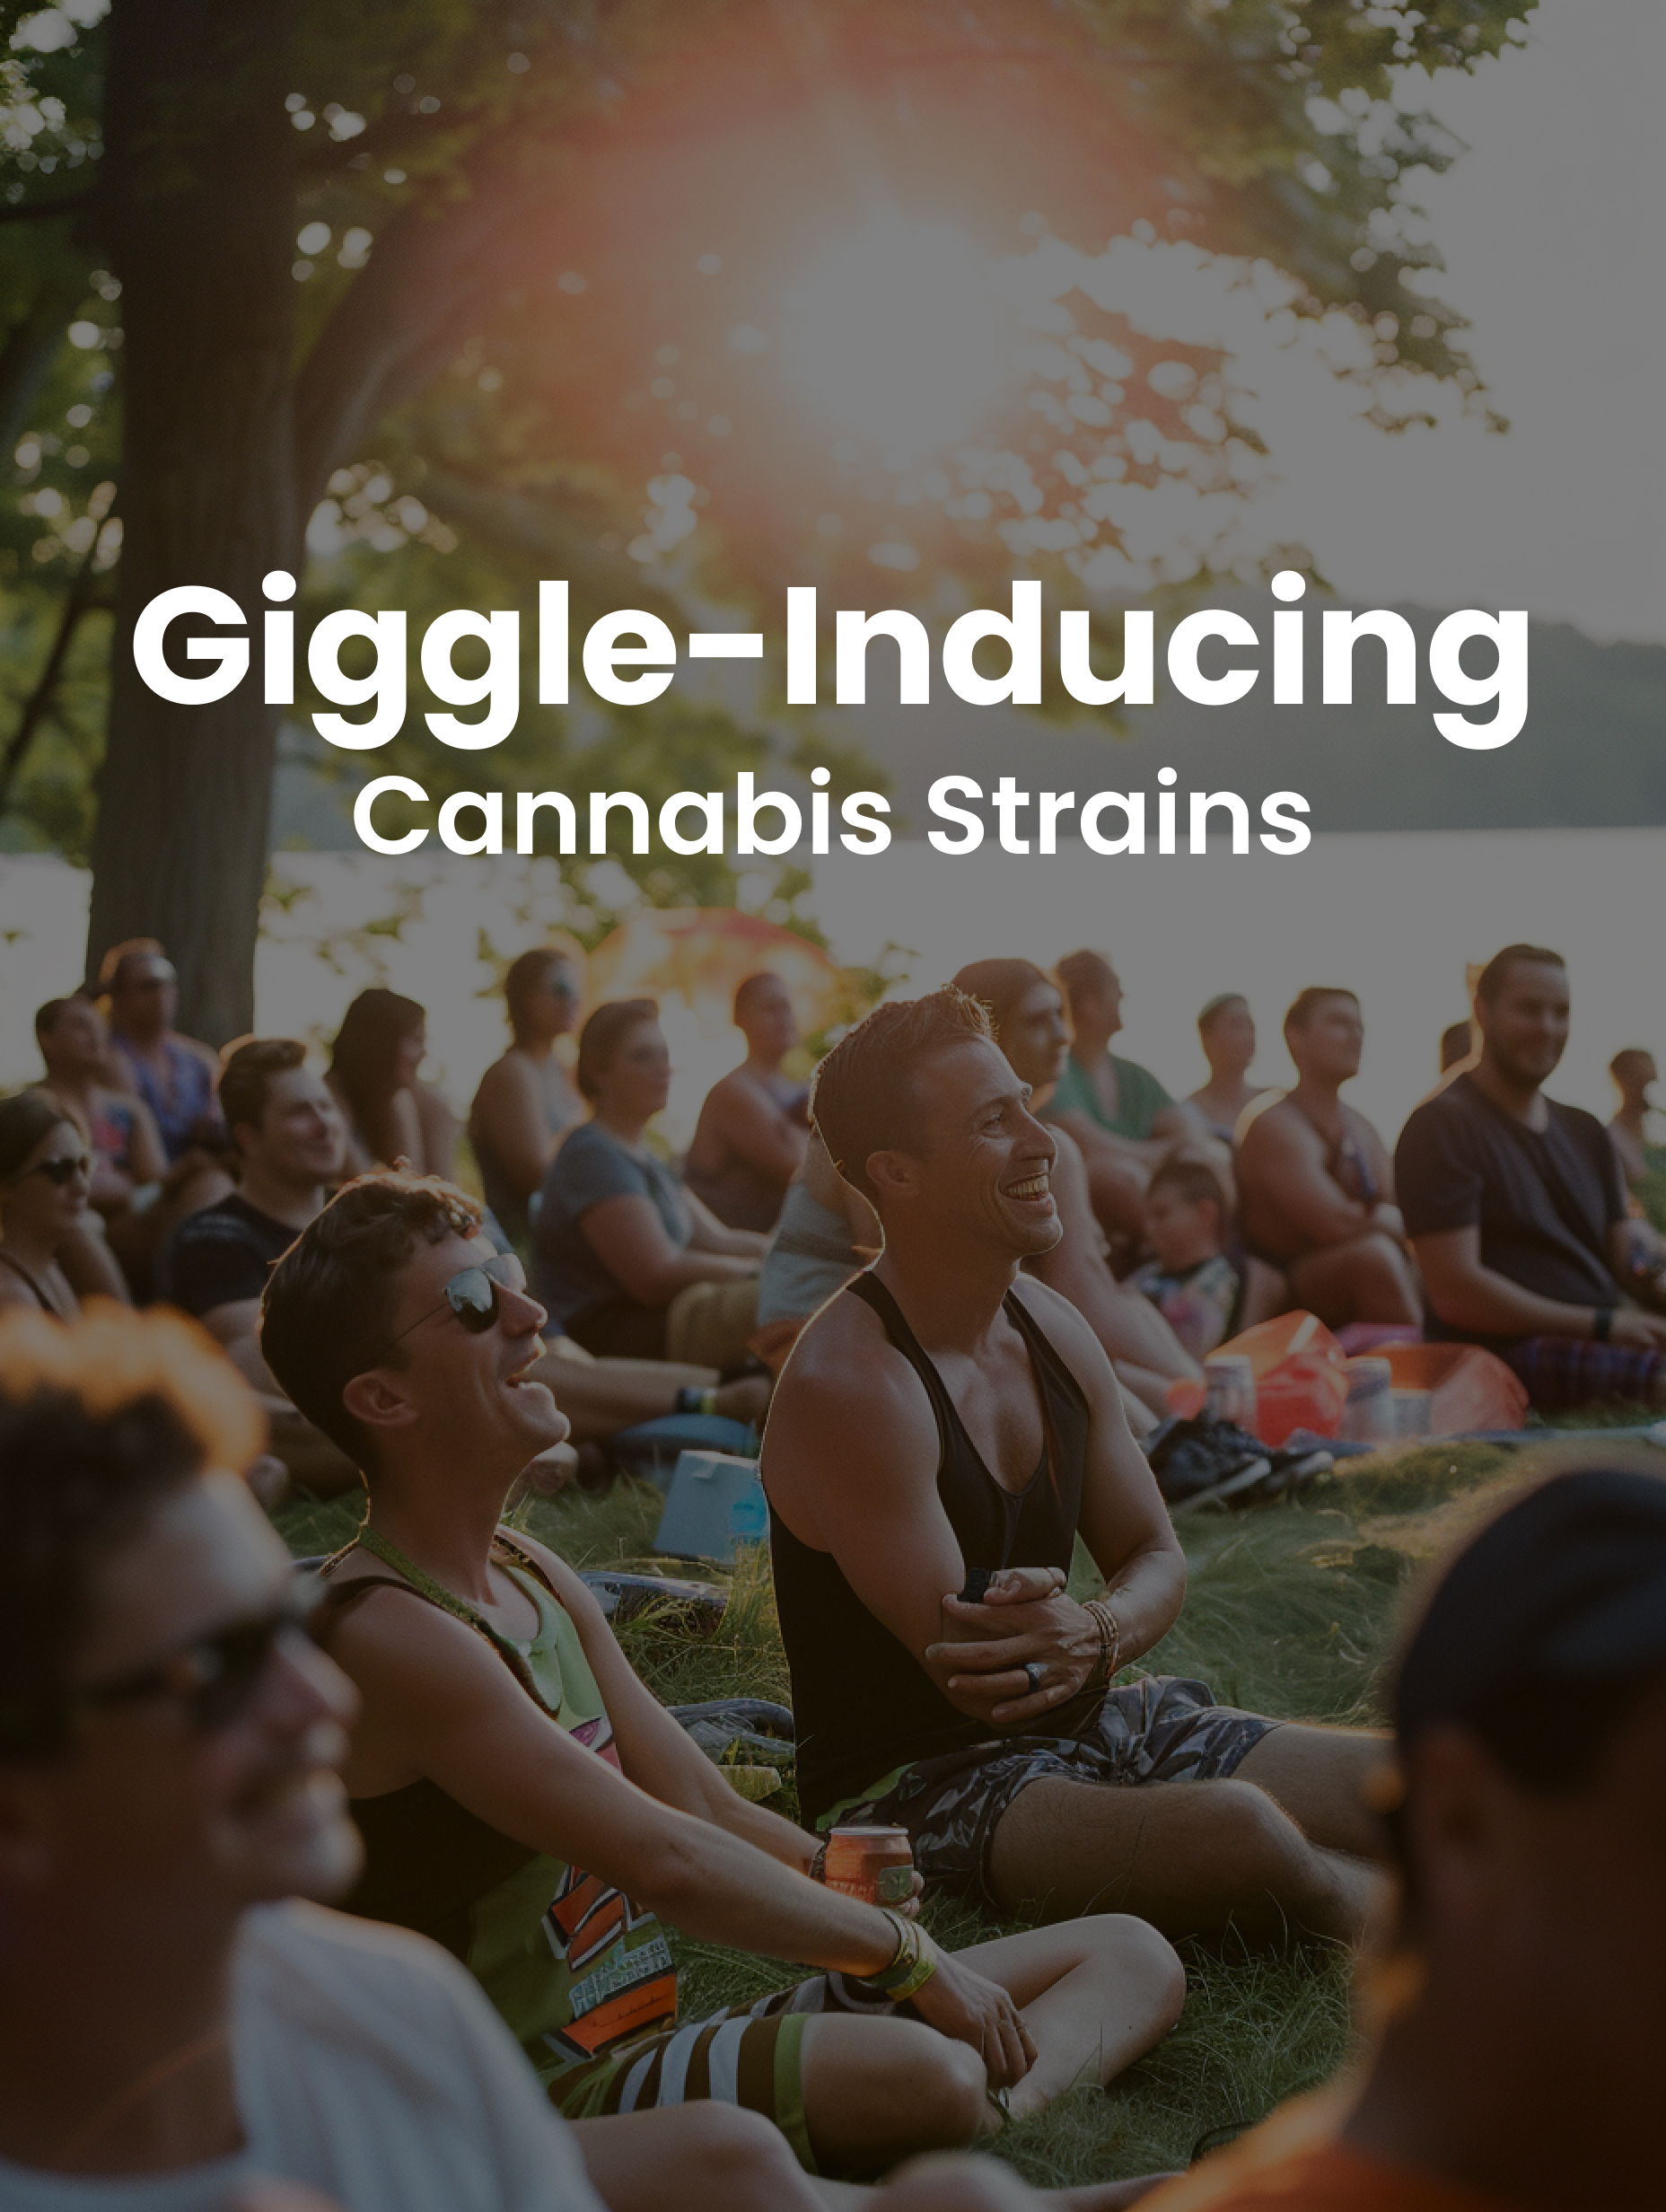 Giggle-Inducing Cannabis Strains